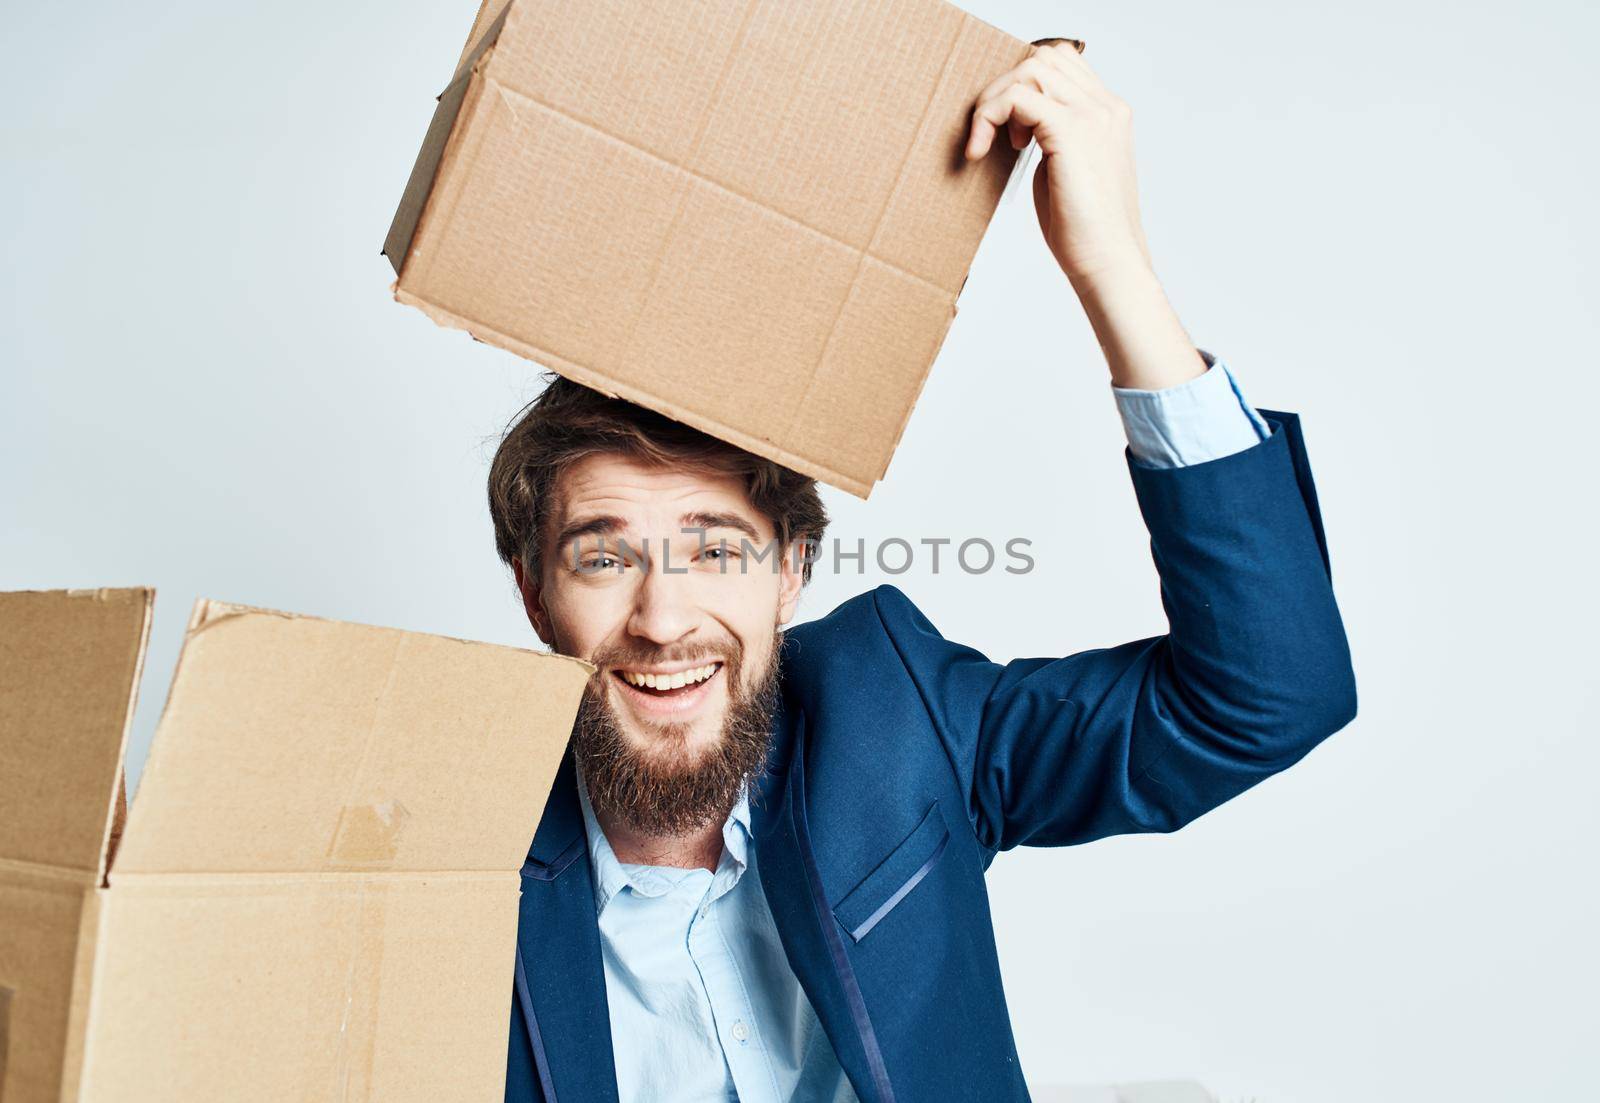 A man with boxes while a suit is moving unpacking. High quality photo